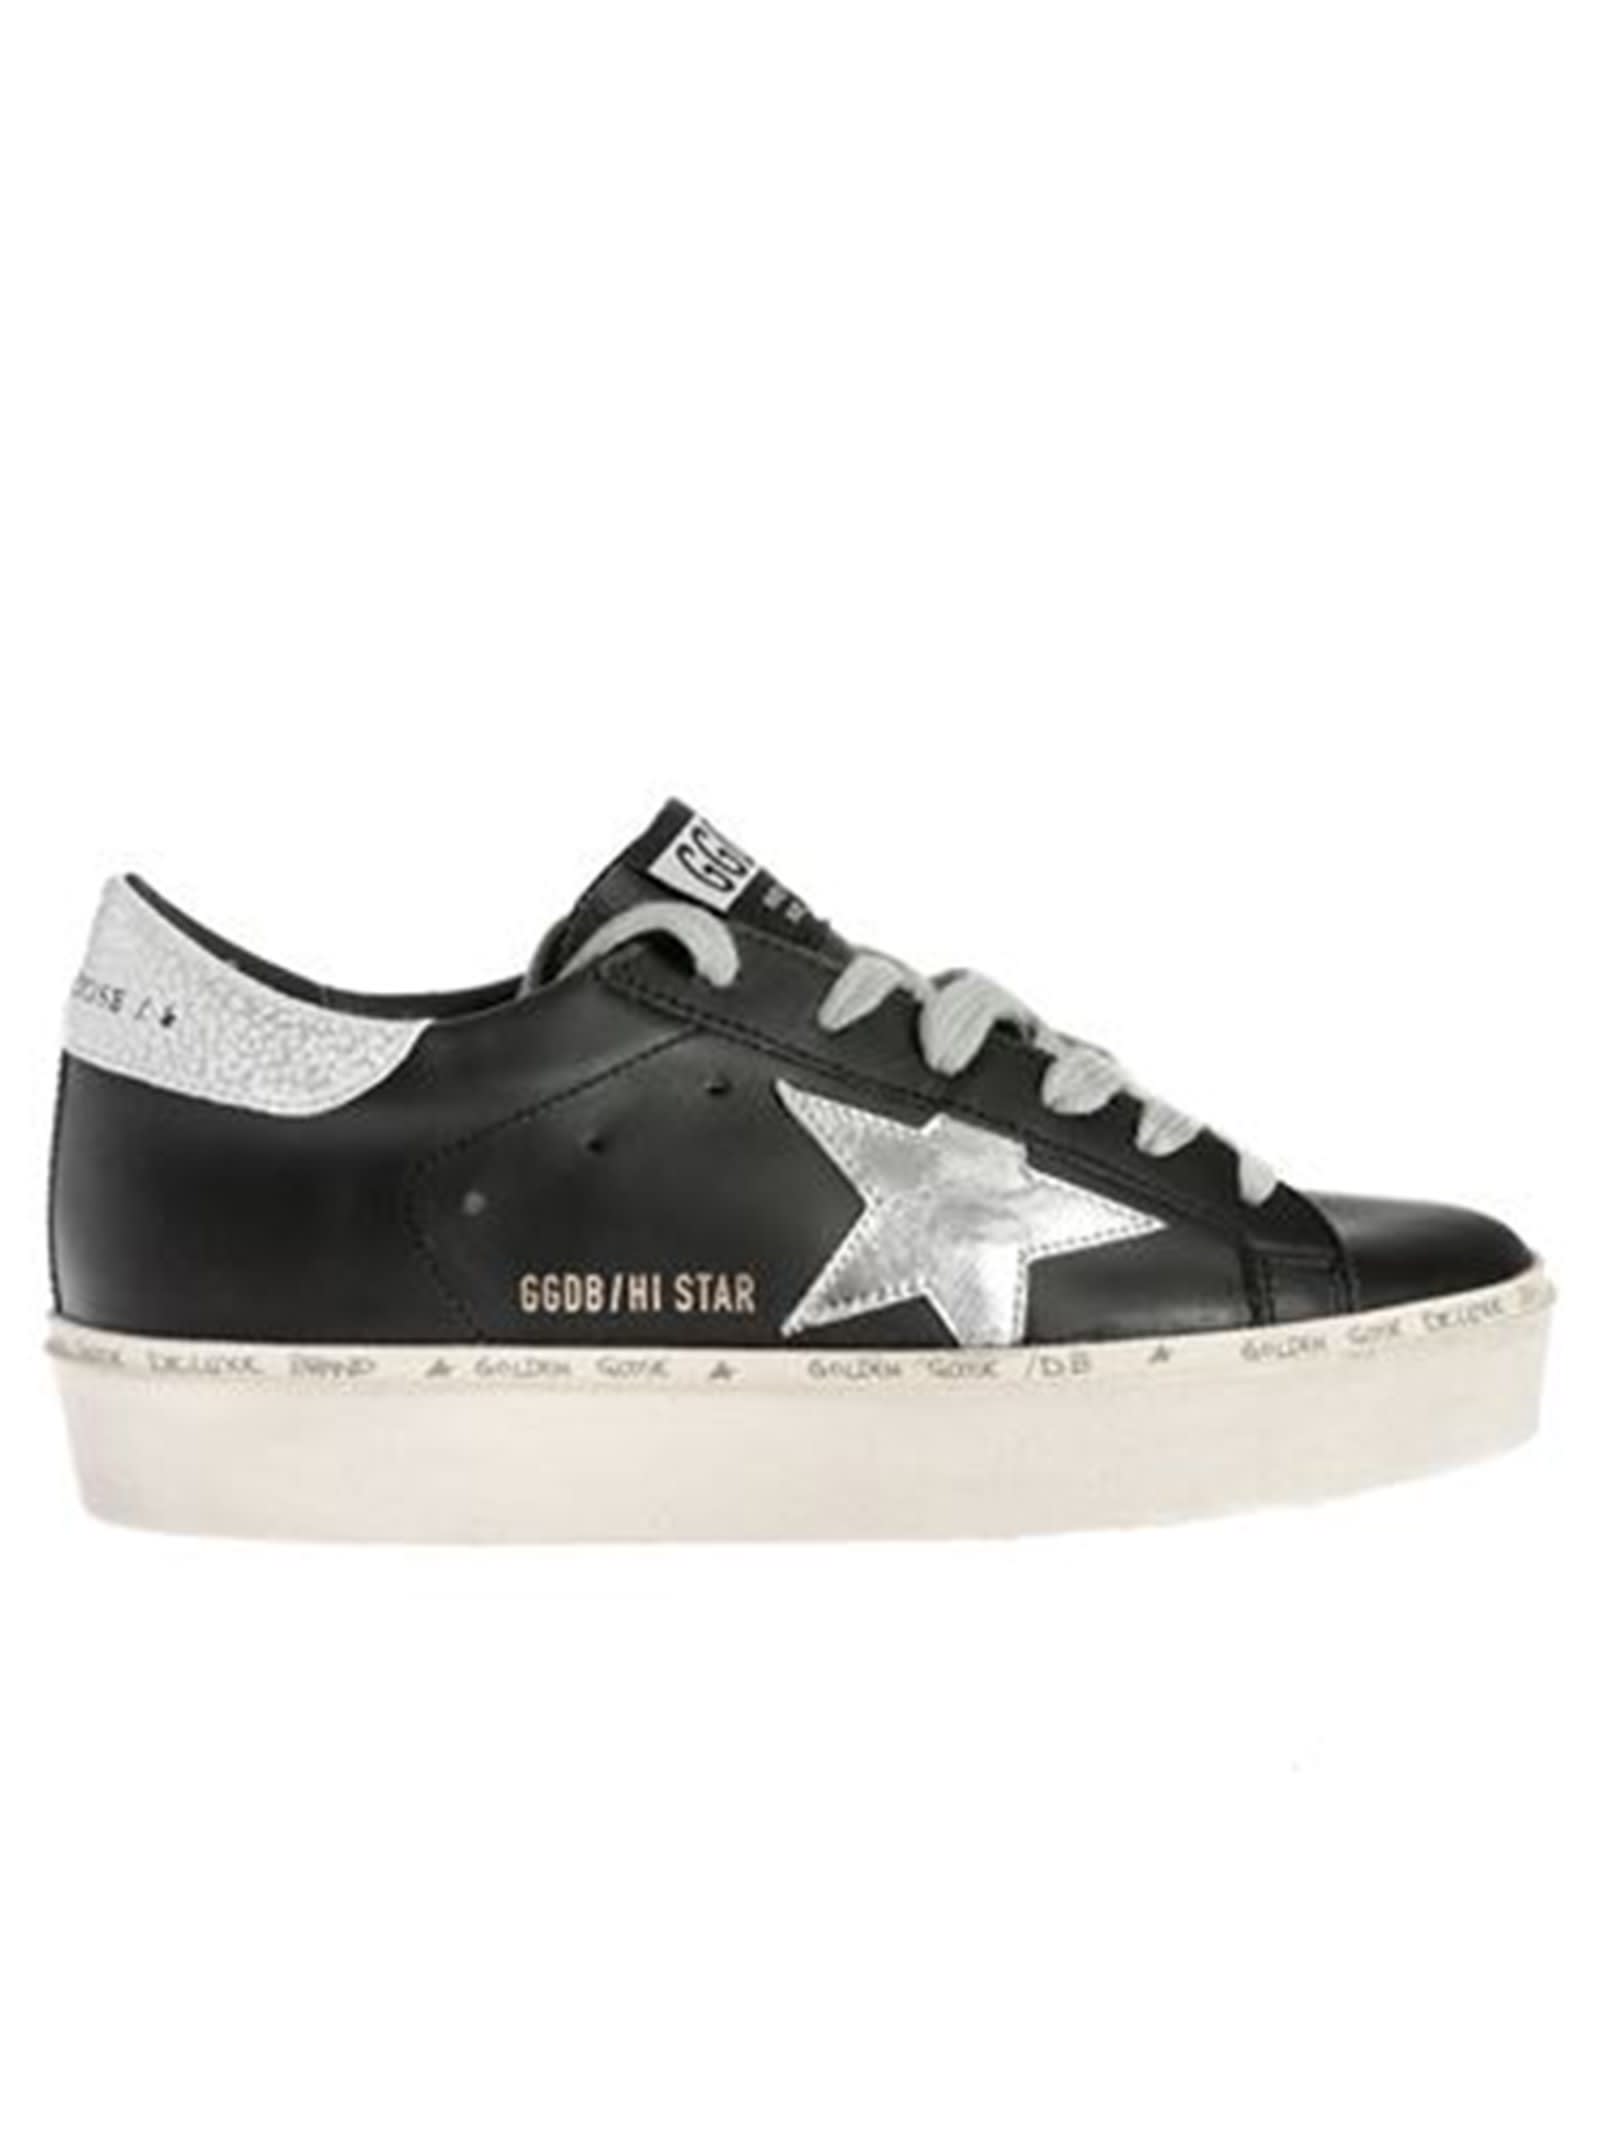 Buy Golden Goose Black Leather Hi Star Sneakers online, shop Golden Goose shoes with free shipping